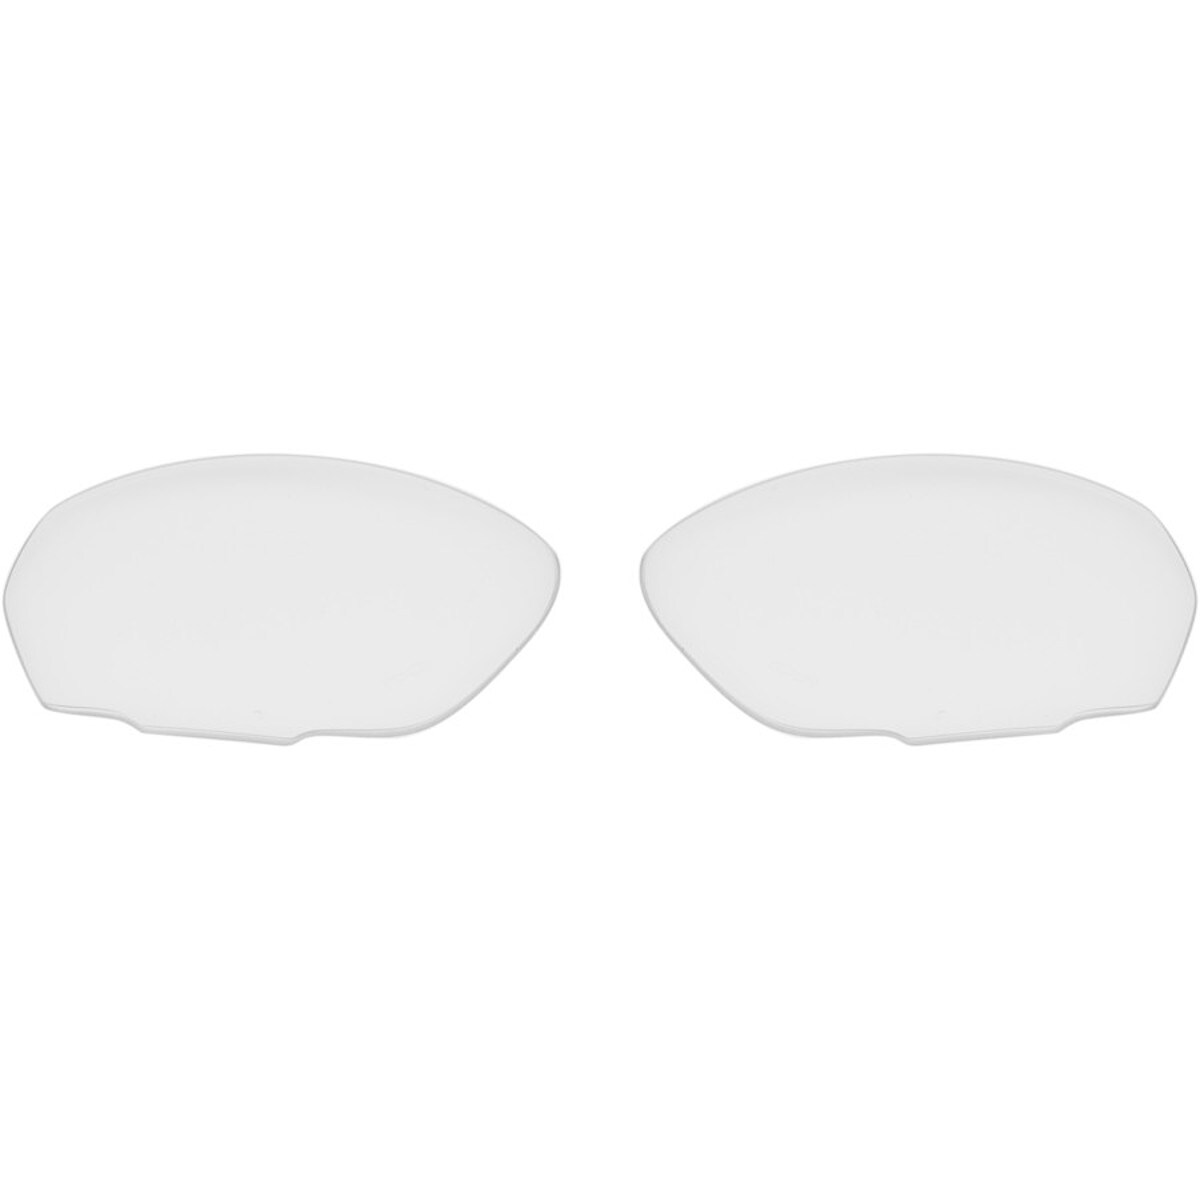 Native Eyewear Endo Sunglass Replacement Lens Clear, One 